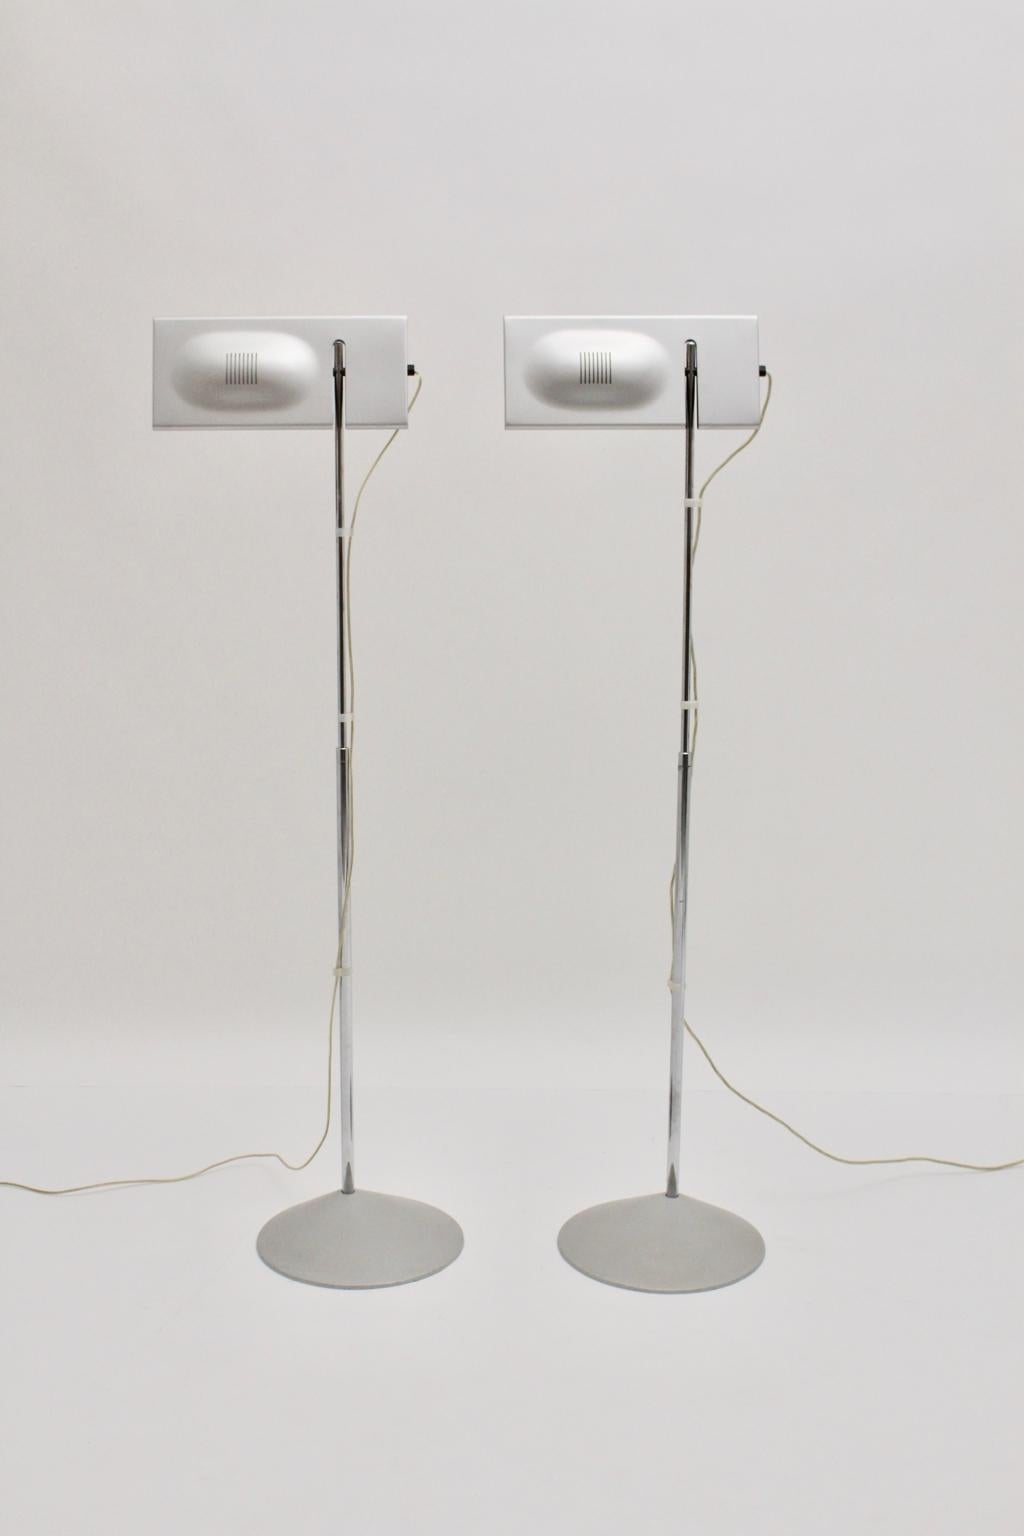 Late 20th Century Modern Vintage Grey Floor Lamps Duna Mario Barbaglia Marco Colombo 1980s Italy For Sale